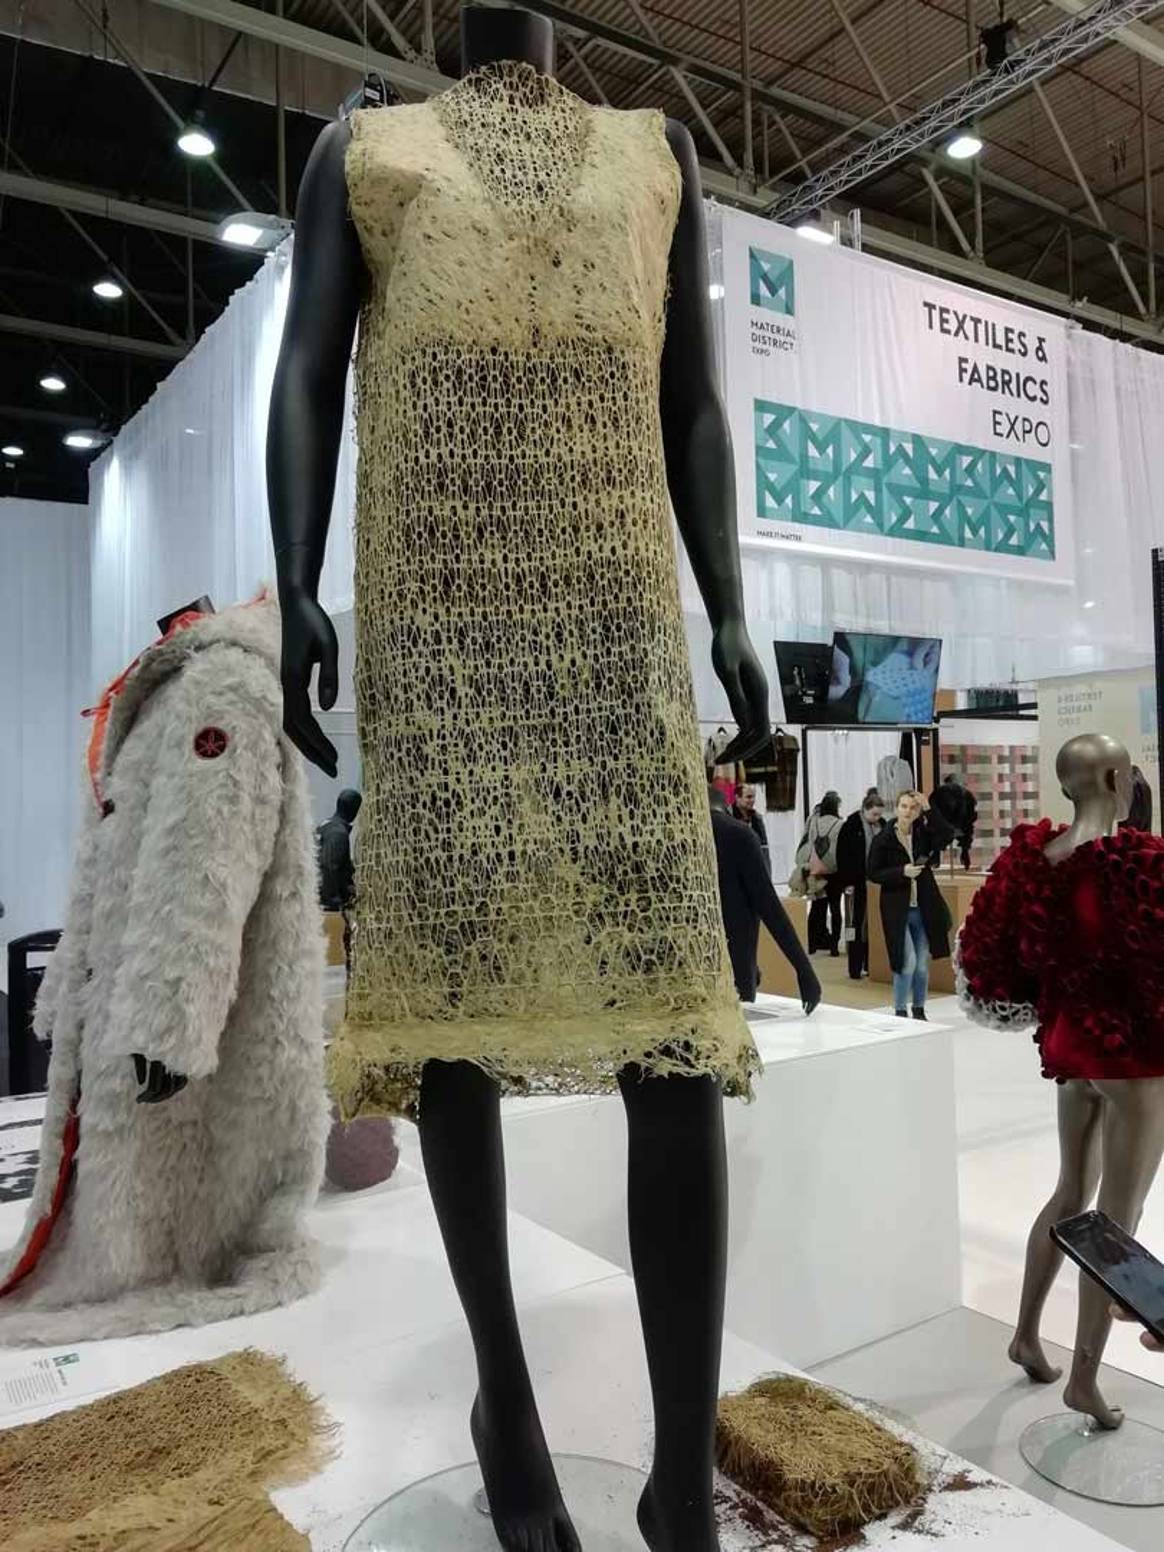 Ten innovations for a more circular fashion production process